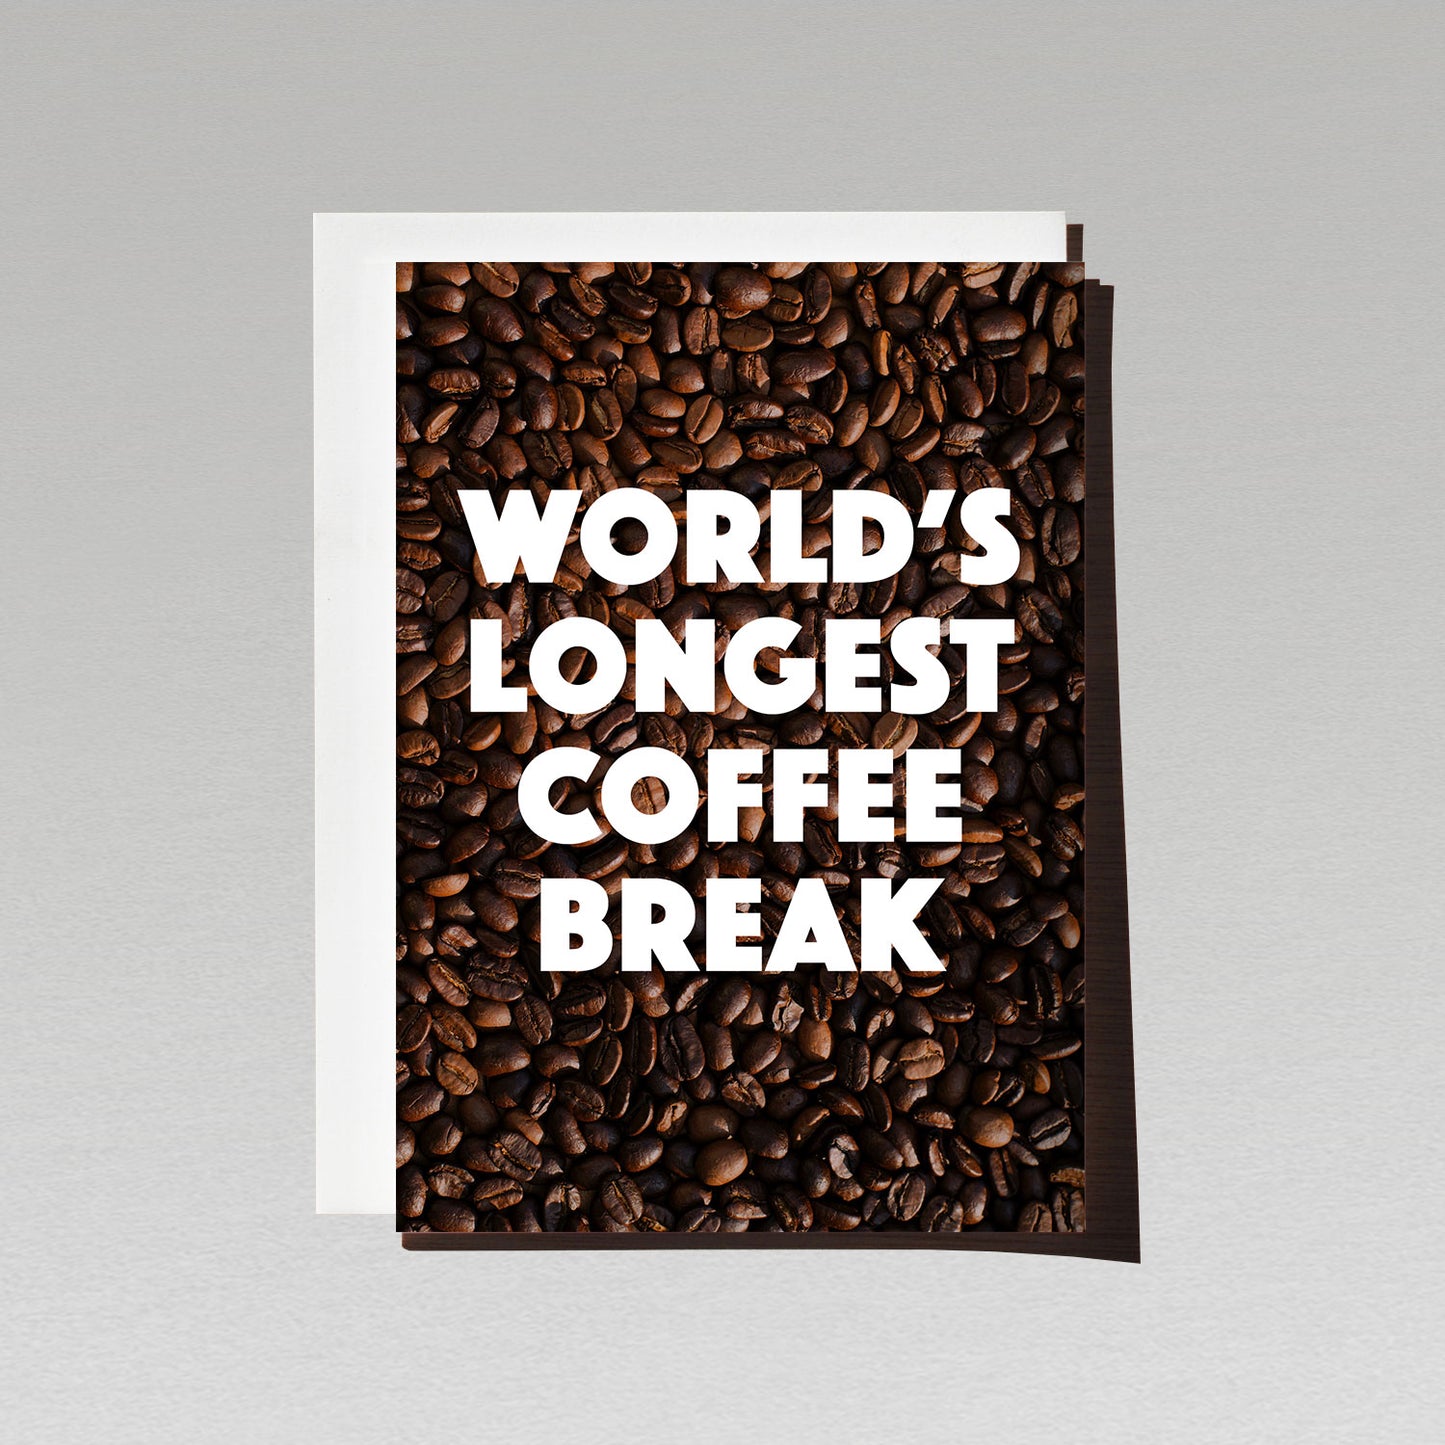 Retirement Greeting card with background filled with roasted coffee beans with white text world's longest coffee break